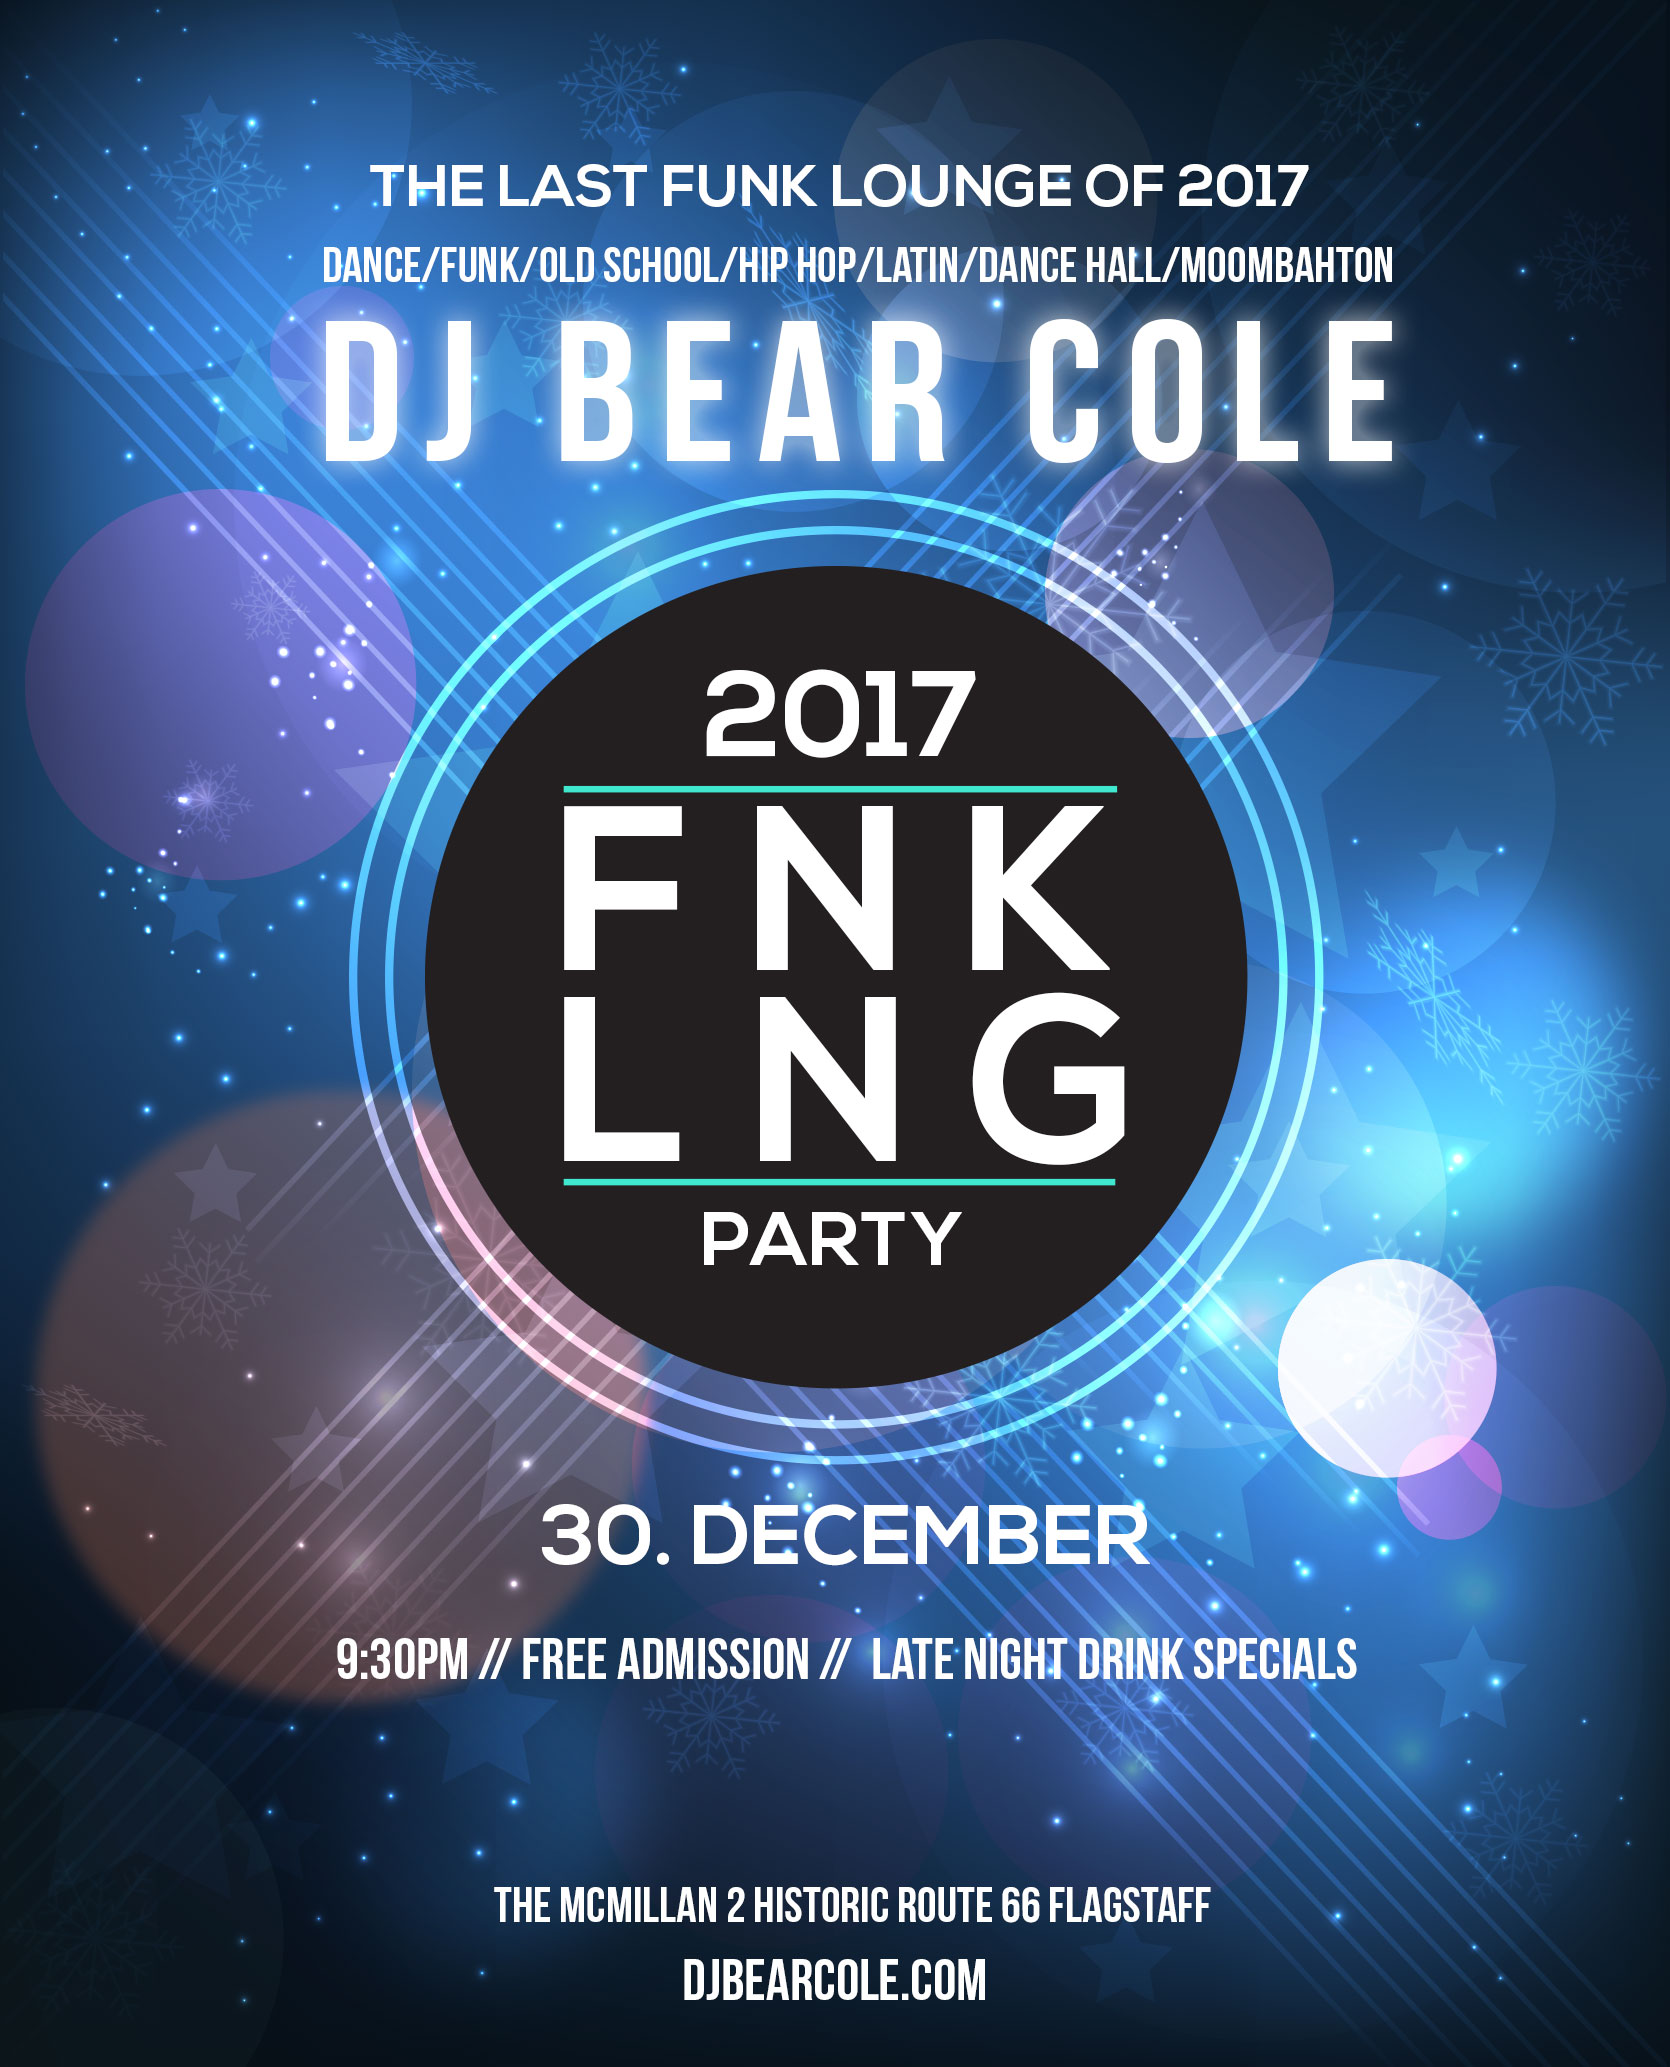 Last Funk Lounge of 2017 Party with DJ Bear Cole